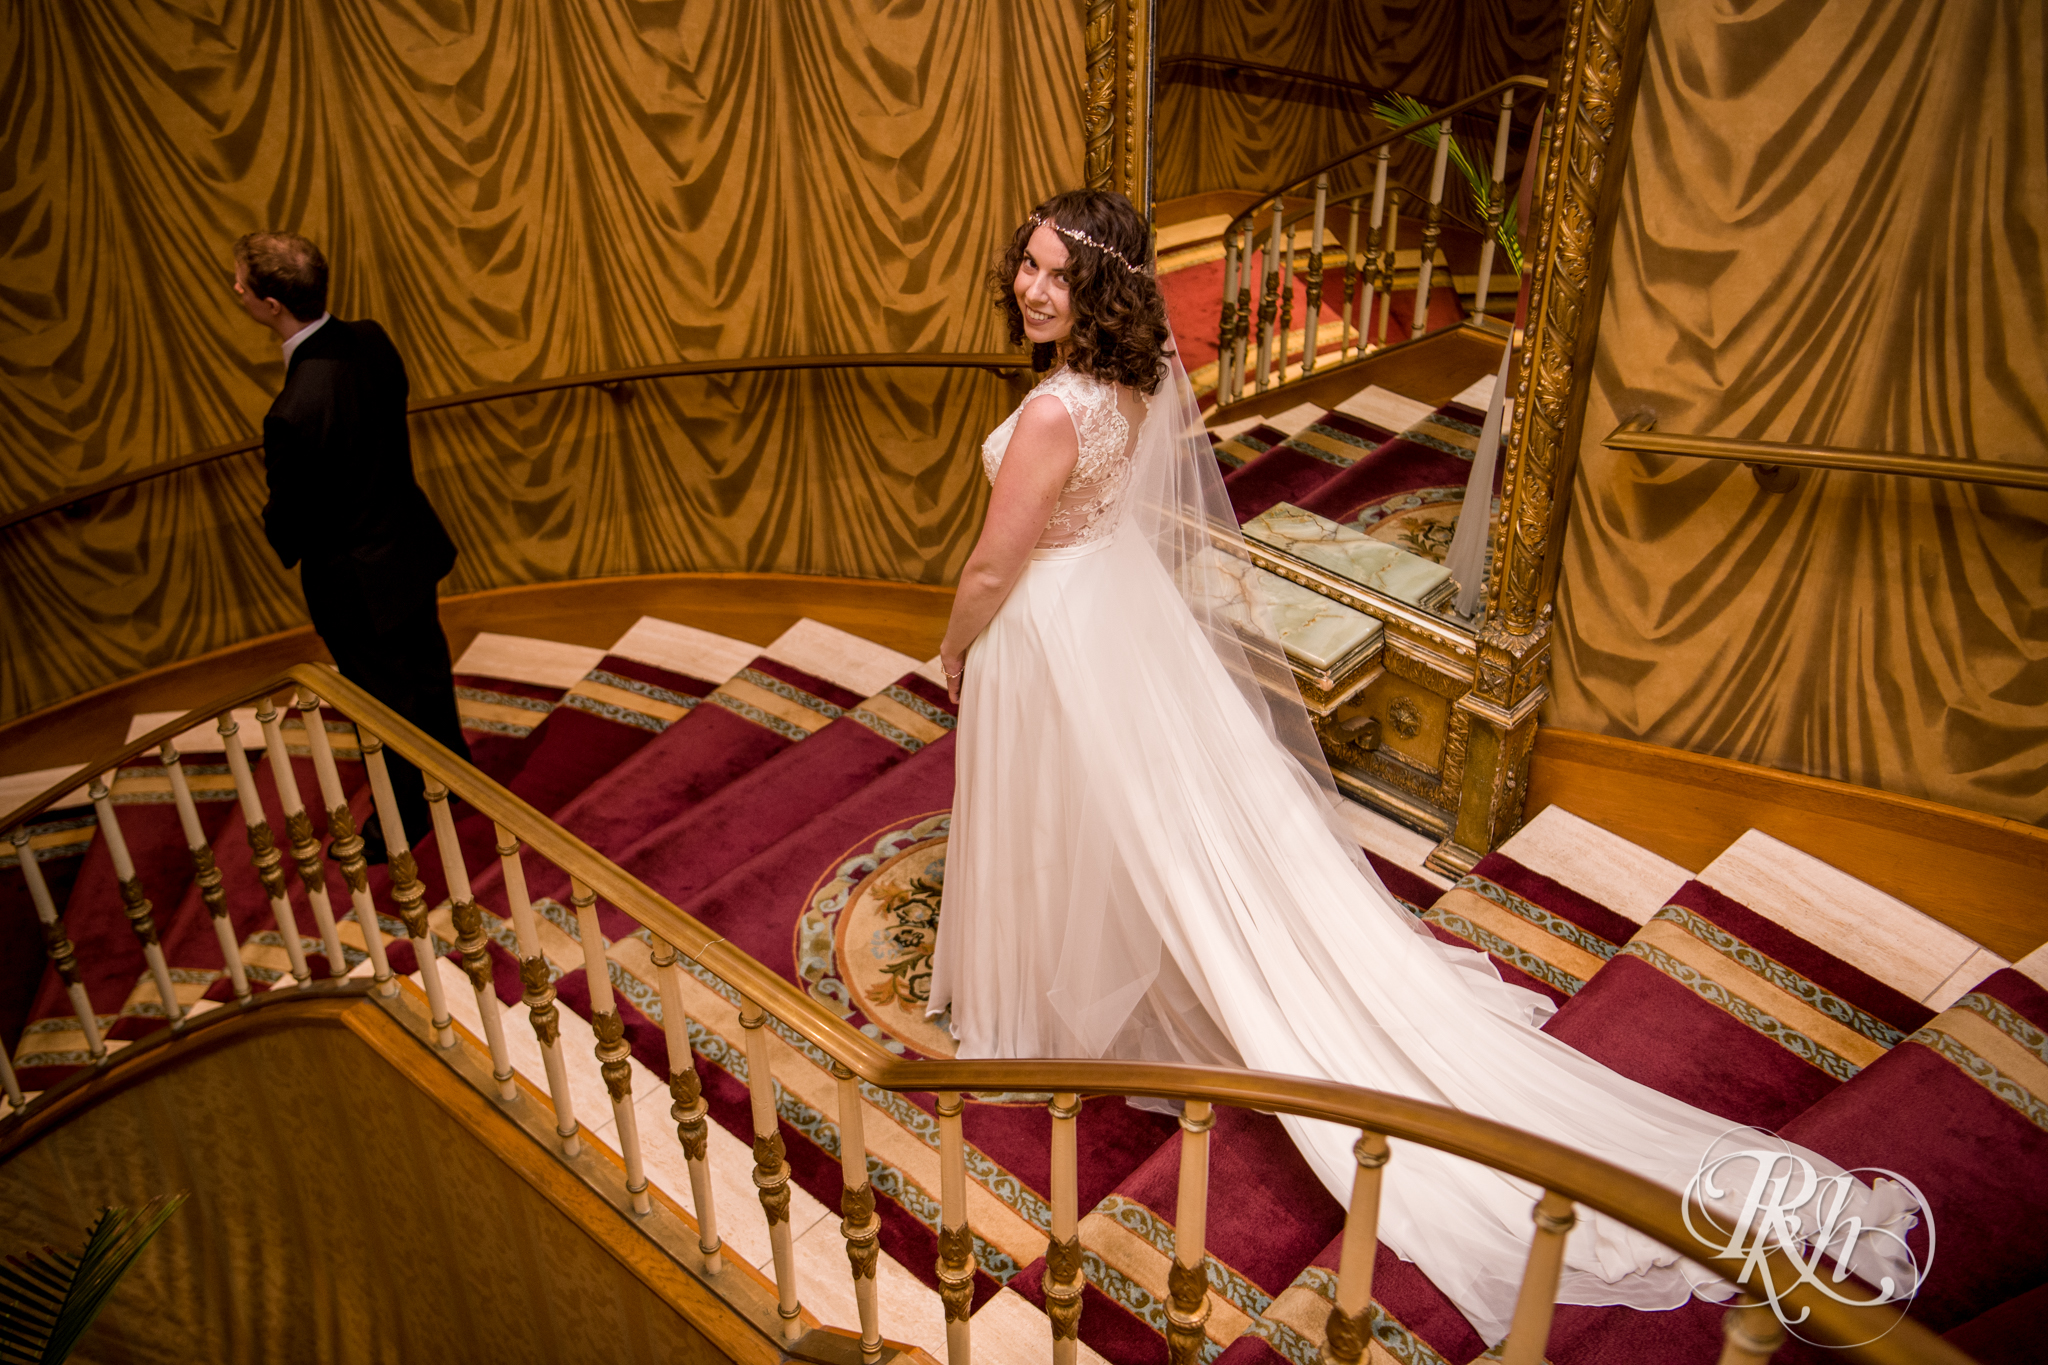 Bride and groom doing first look on staircase at the Saint Paul Hotel in Saint Paul, Minnesota.